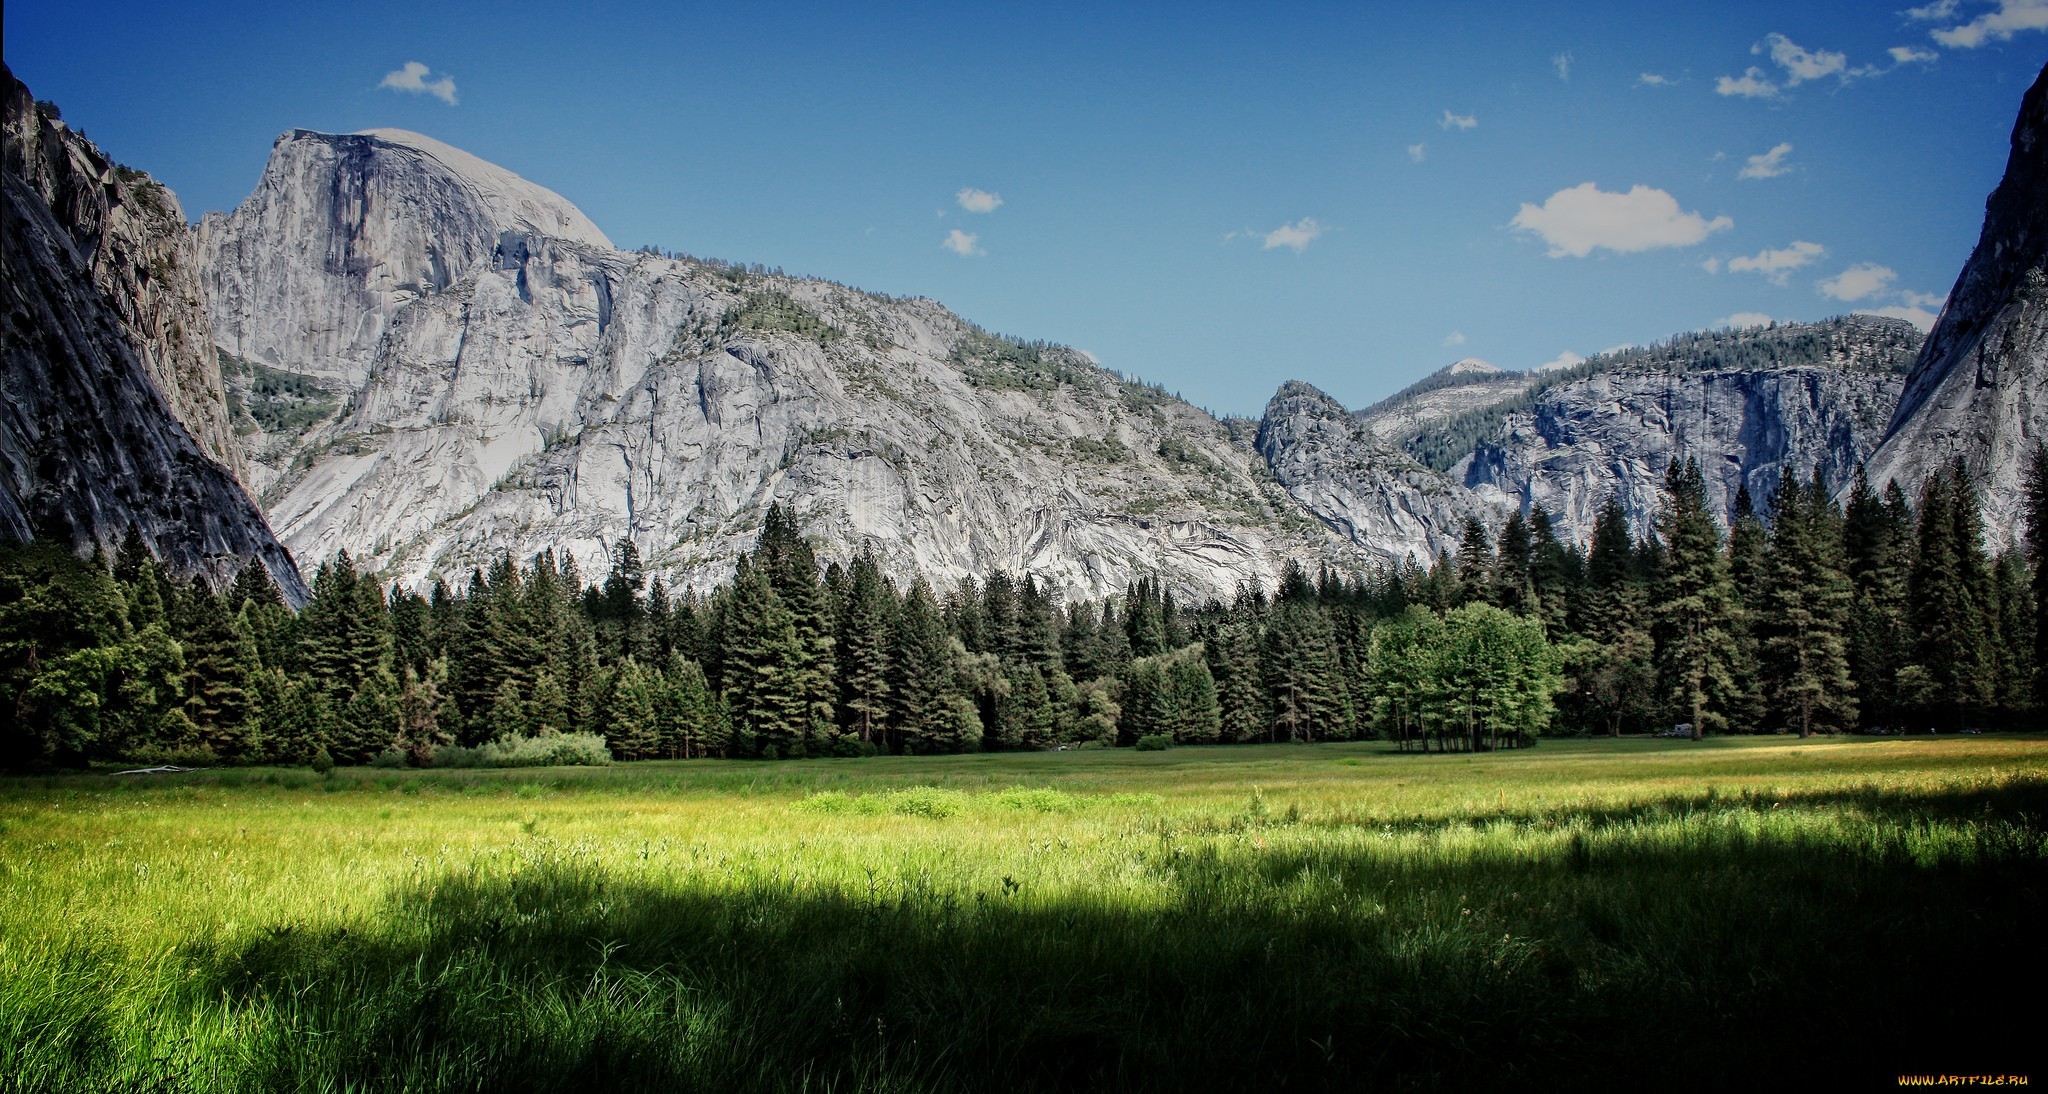 General 2048x1094 nature mountains trees Yosemite National Park Half Dome USA